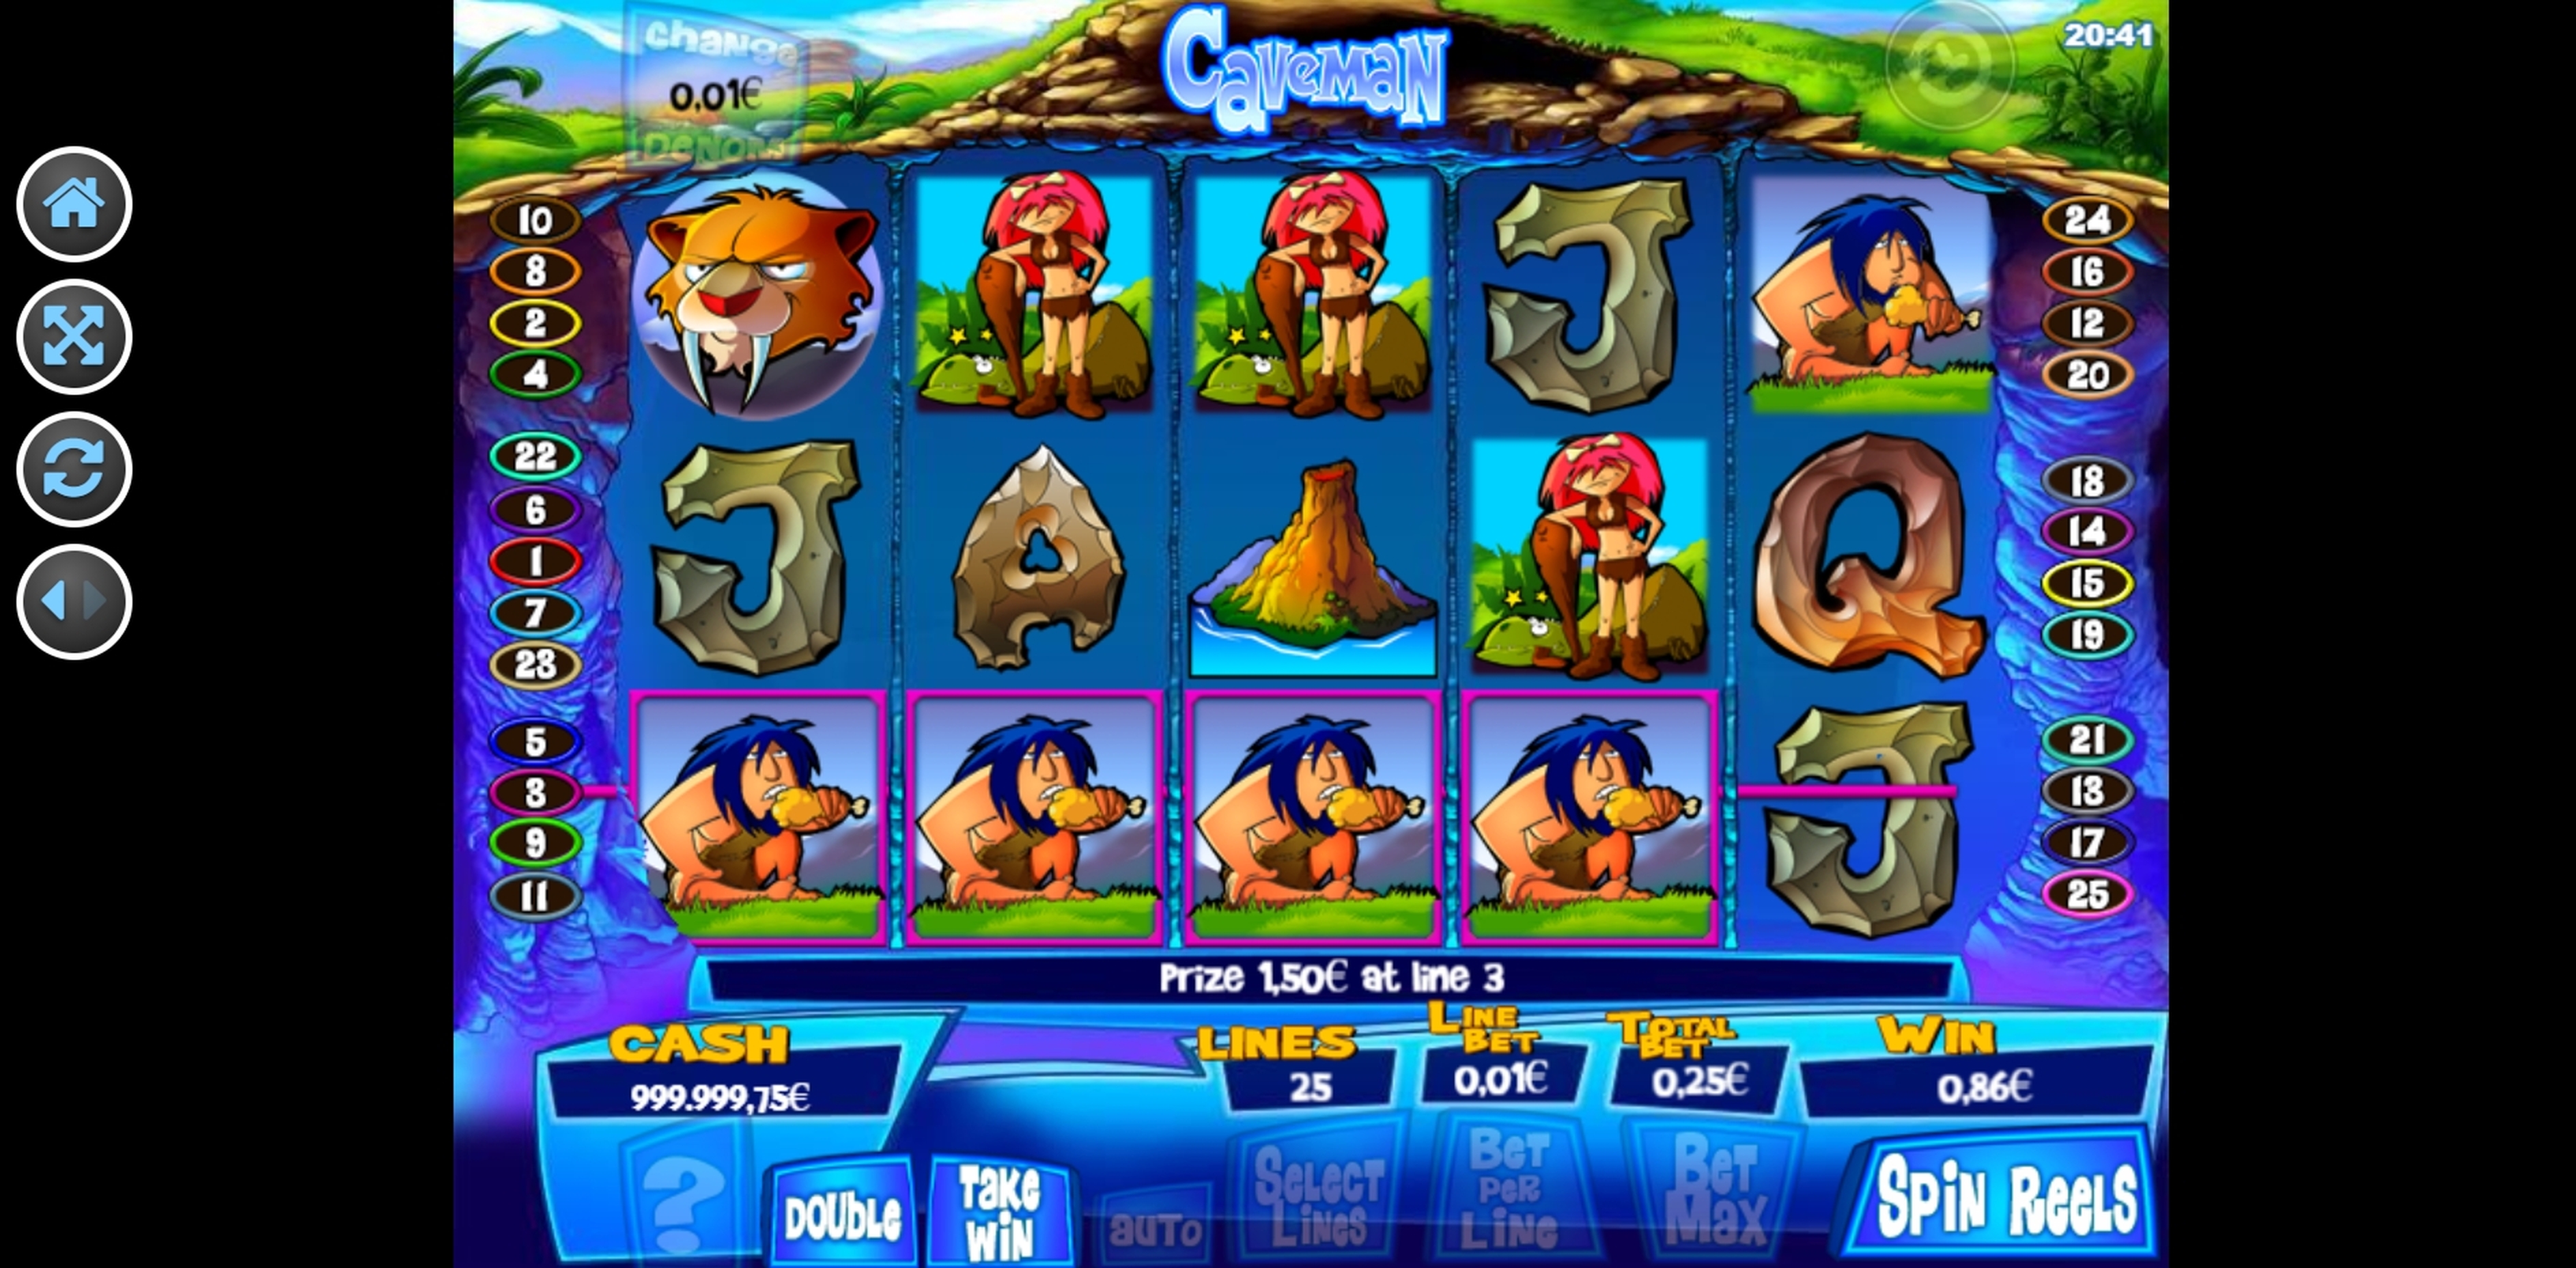 Win Money in Caveman Free Slot Game by R. Franco